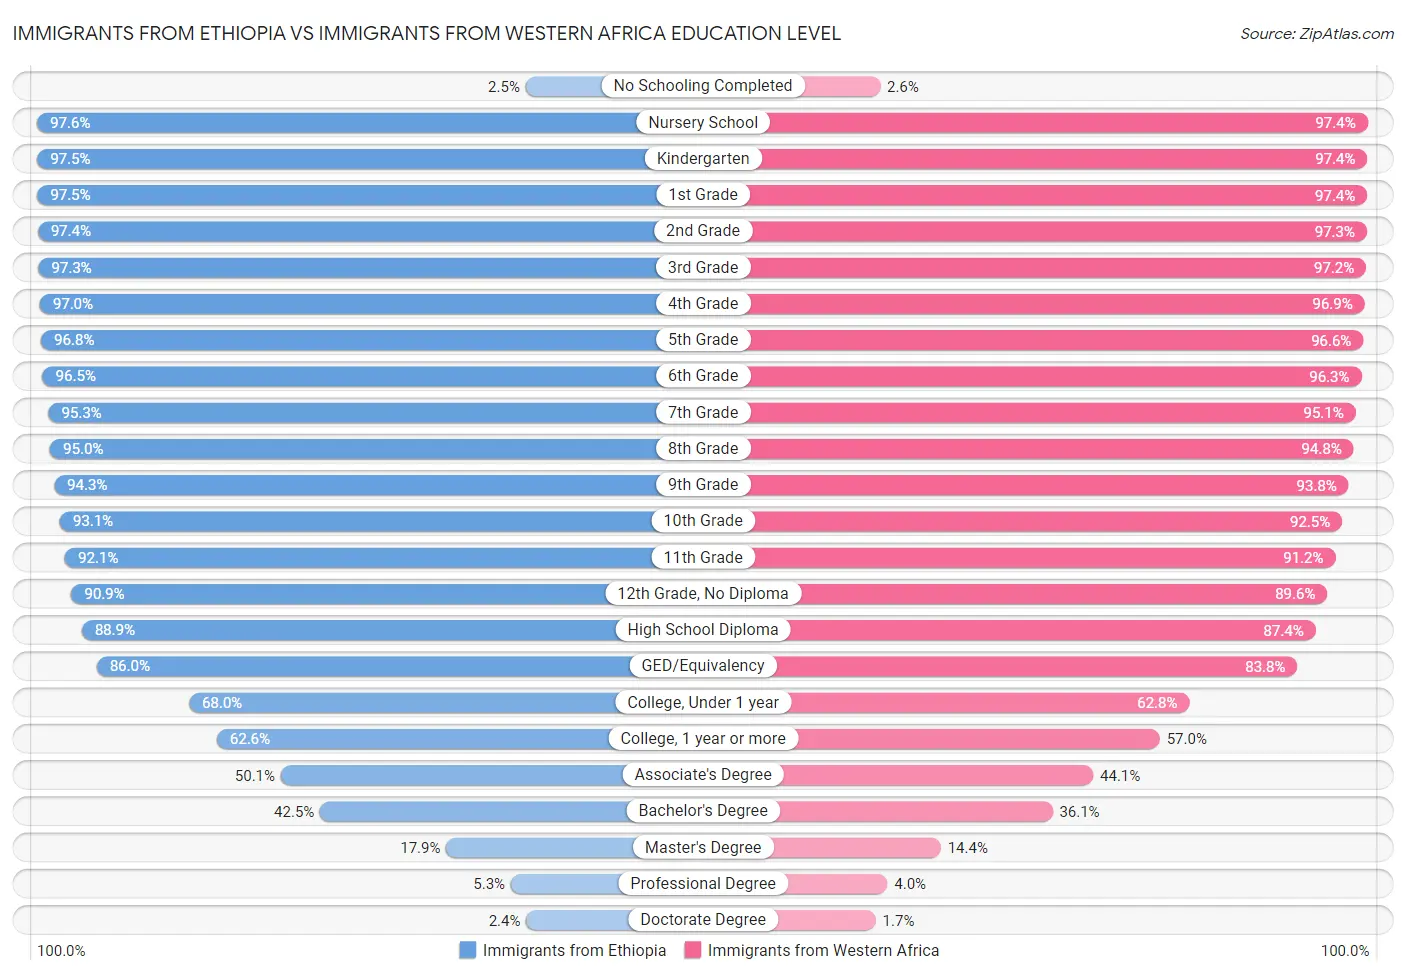 Immigrants from Ethiopia vs Immigrants from Western Africa Education Level